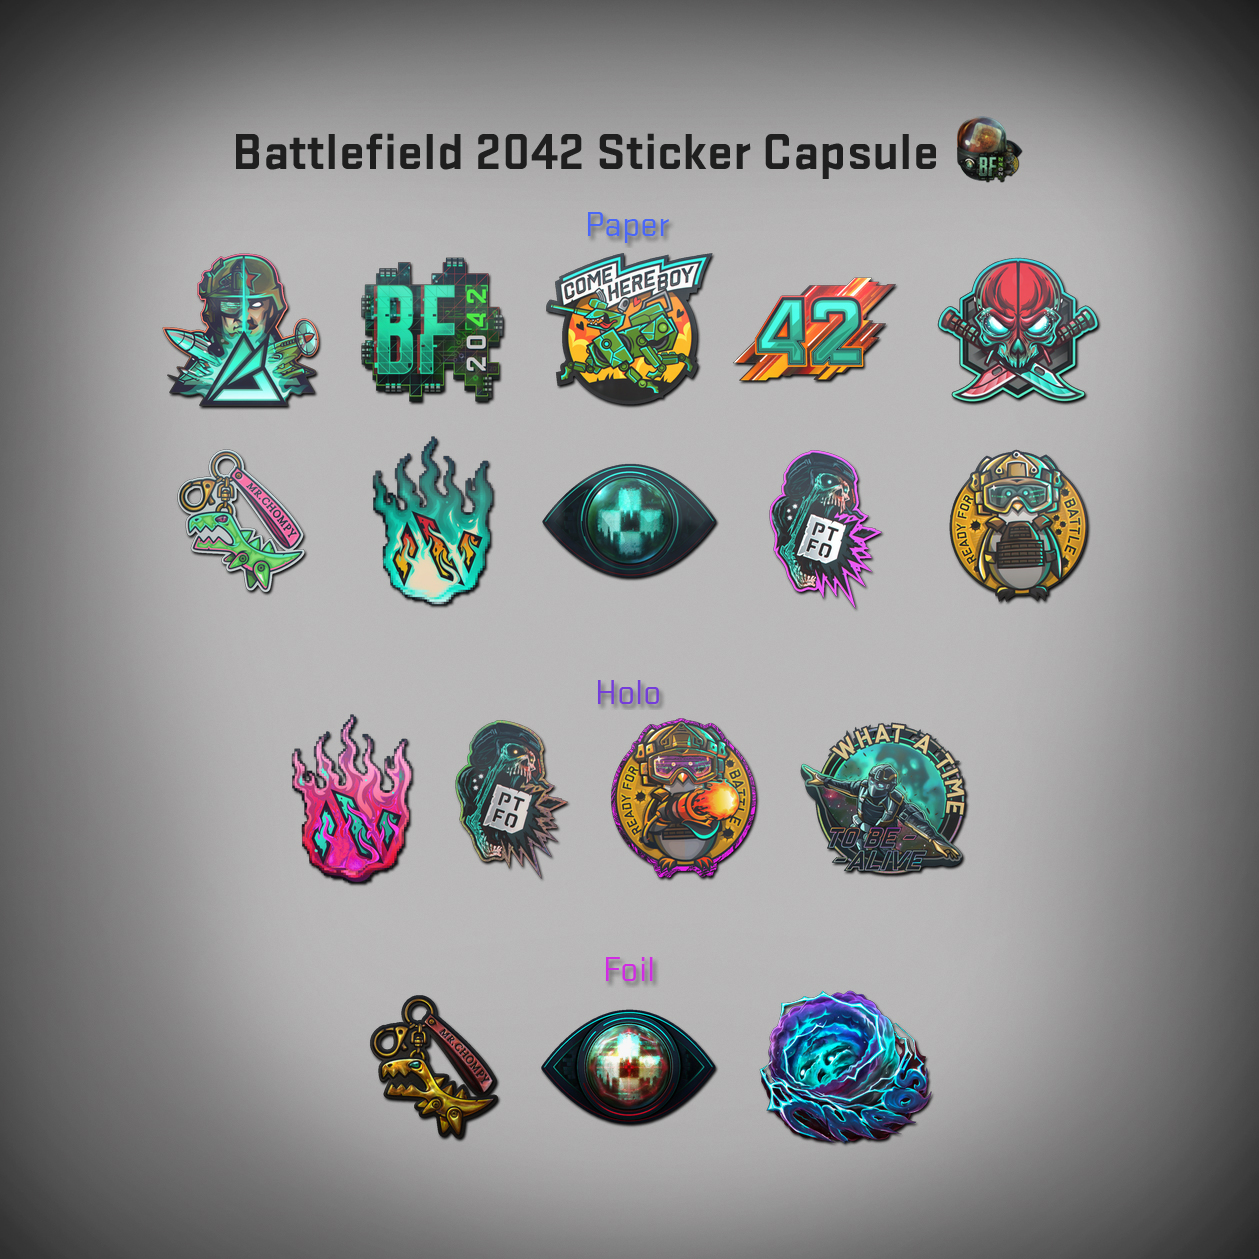 Battlefield 2042 Stickers Added to CSGO Ahead of Game’s Release